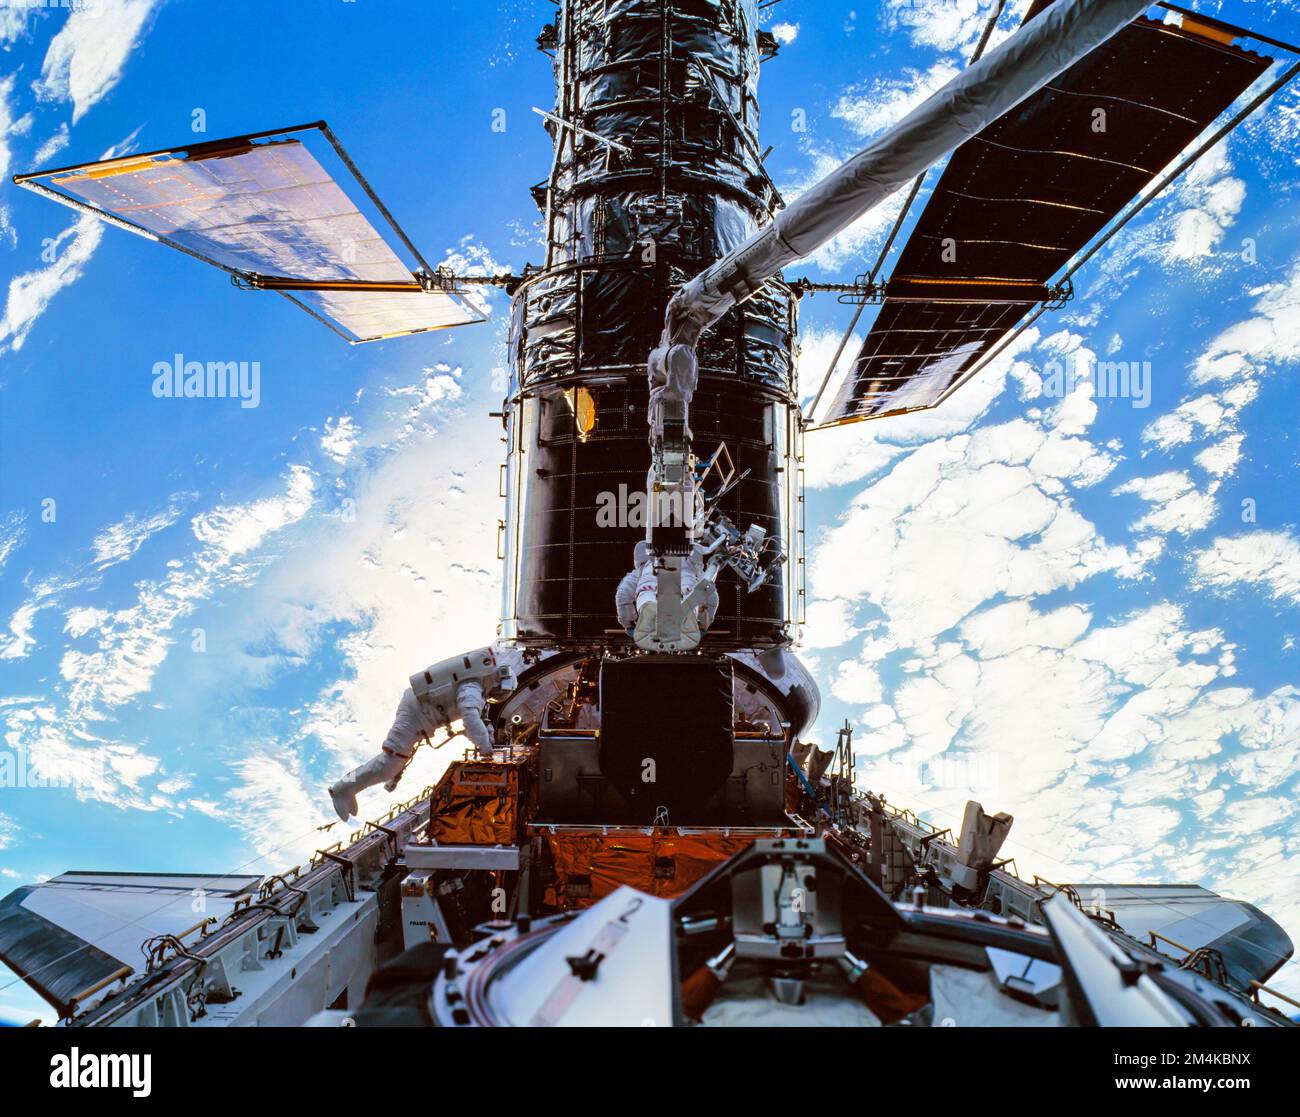 Astronauts servicing the Hubble telescope in space. Planet earth seen in the background. Digitally enhanced. Elements of this image furnished by NASA. Stock Photo